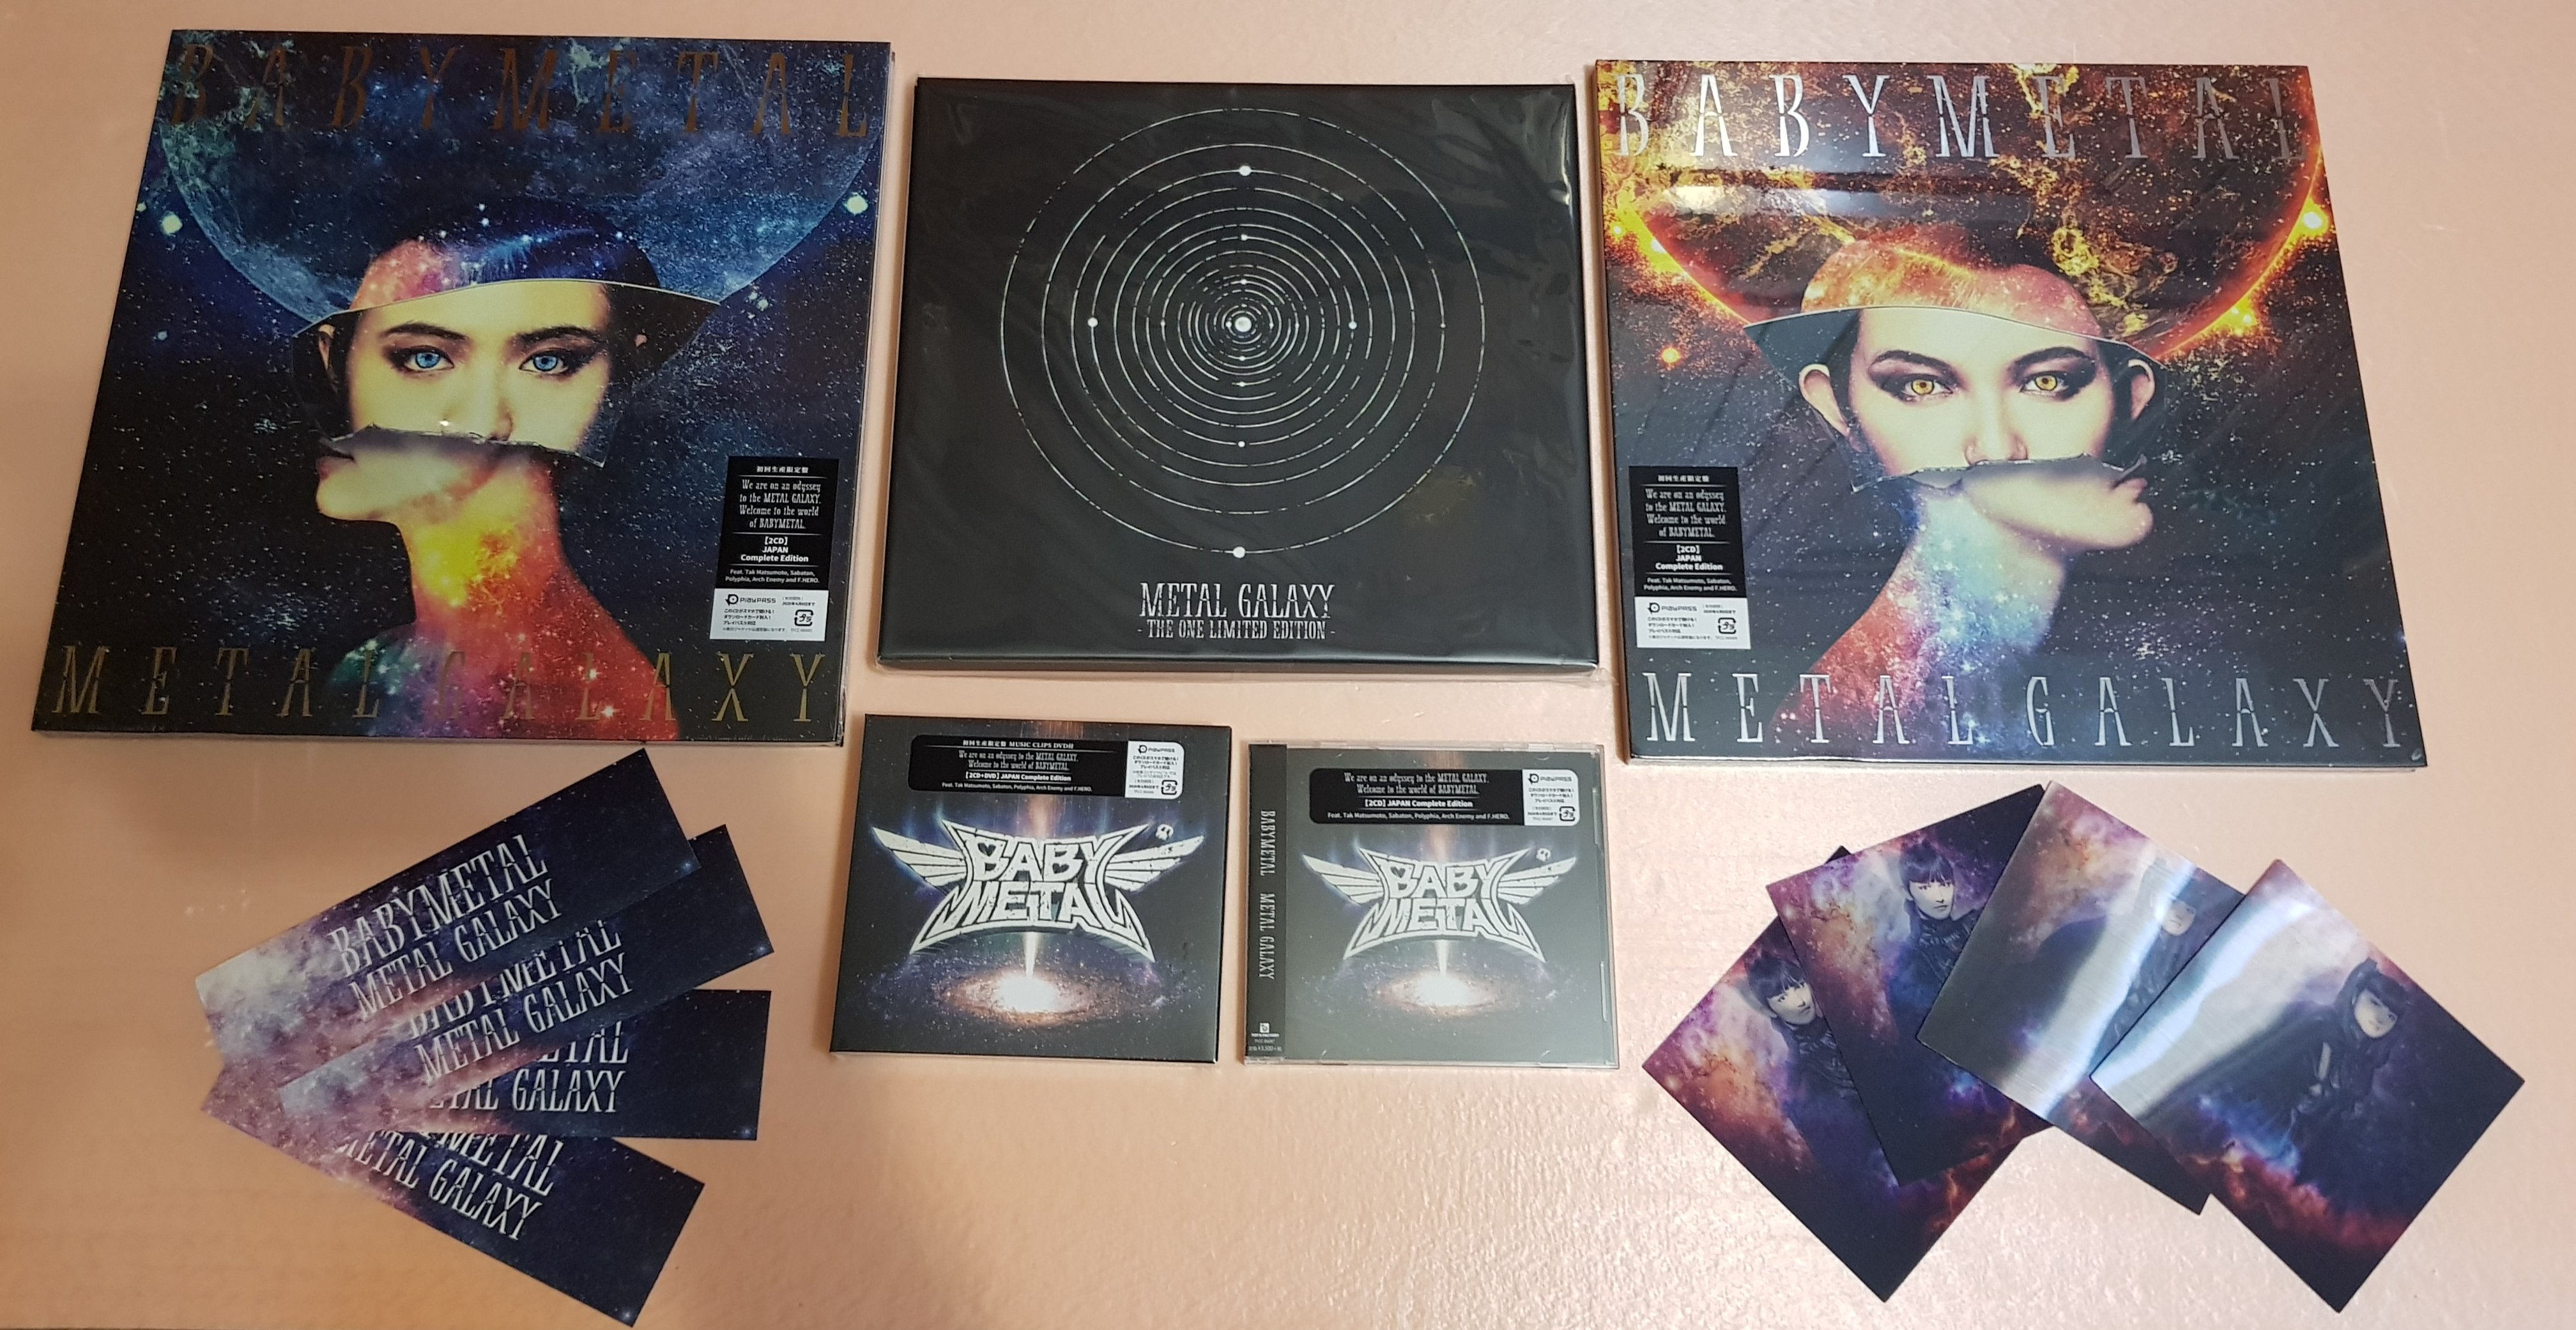 METAL GALAXY THE ONE LIMITED EDITION